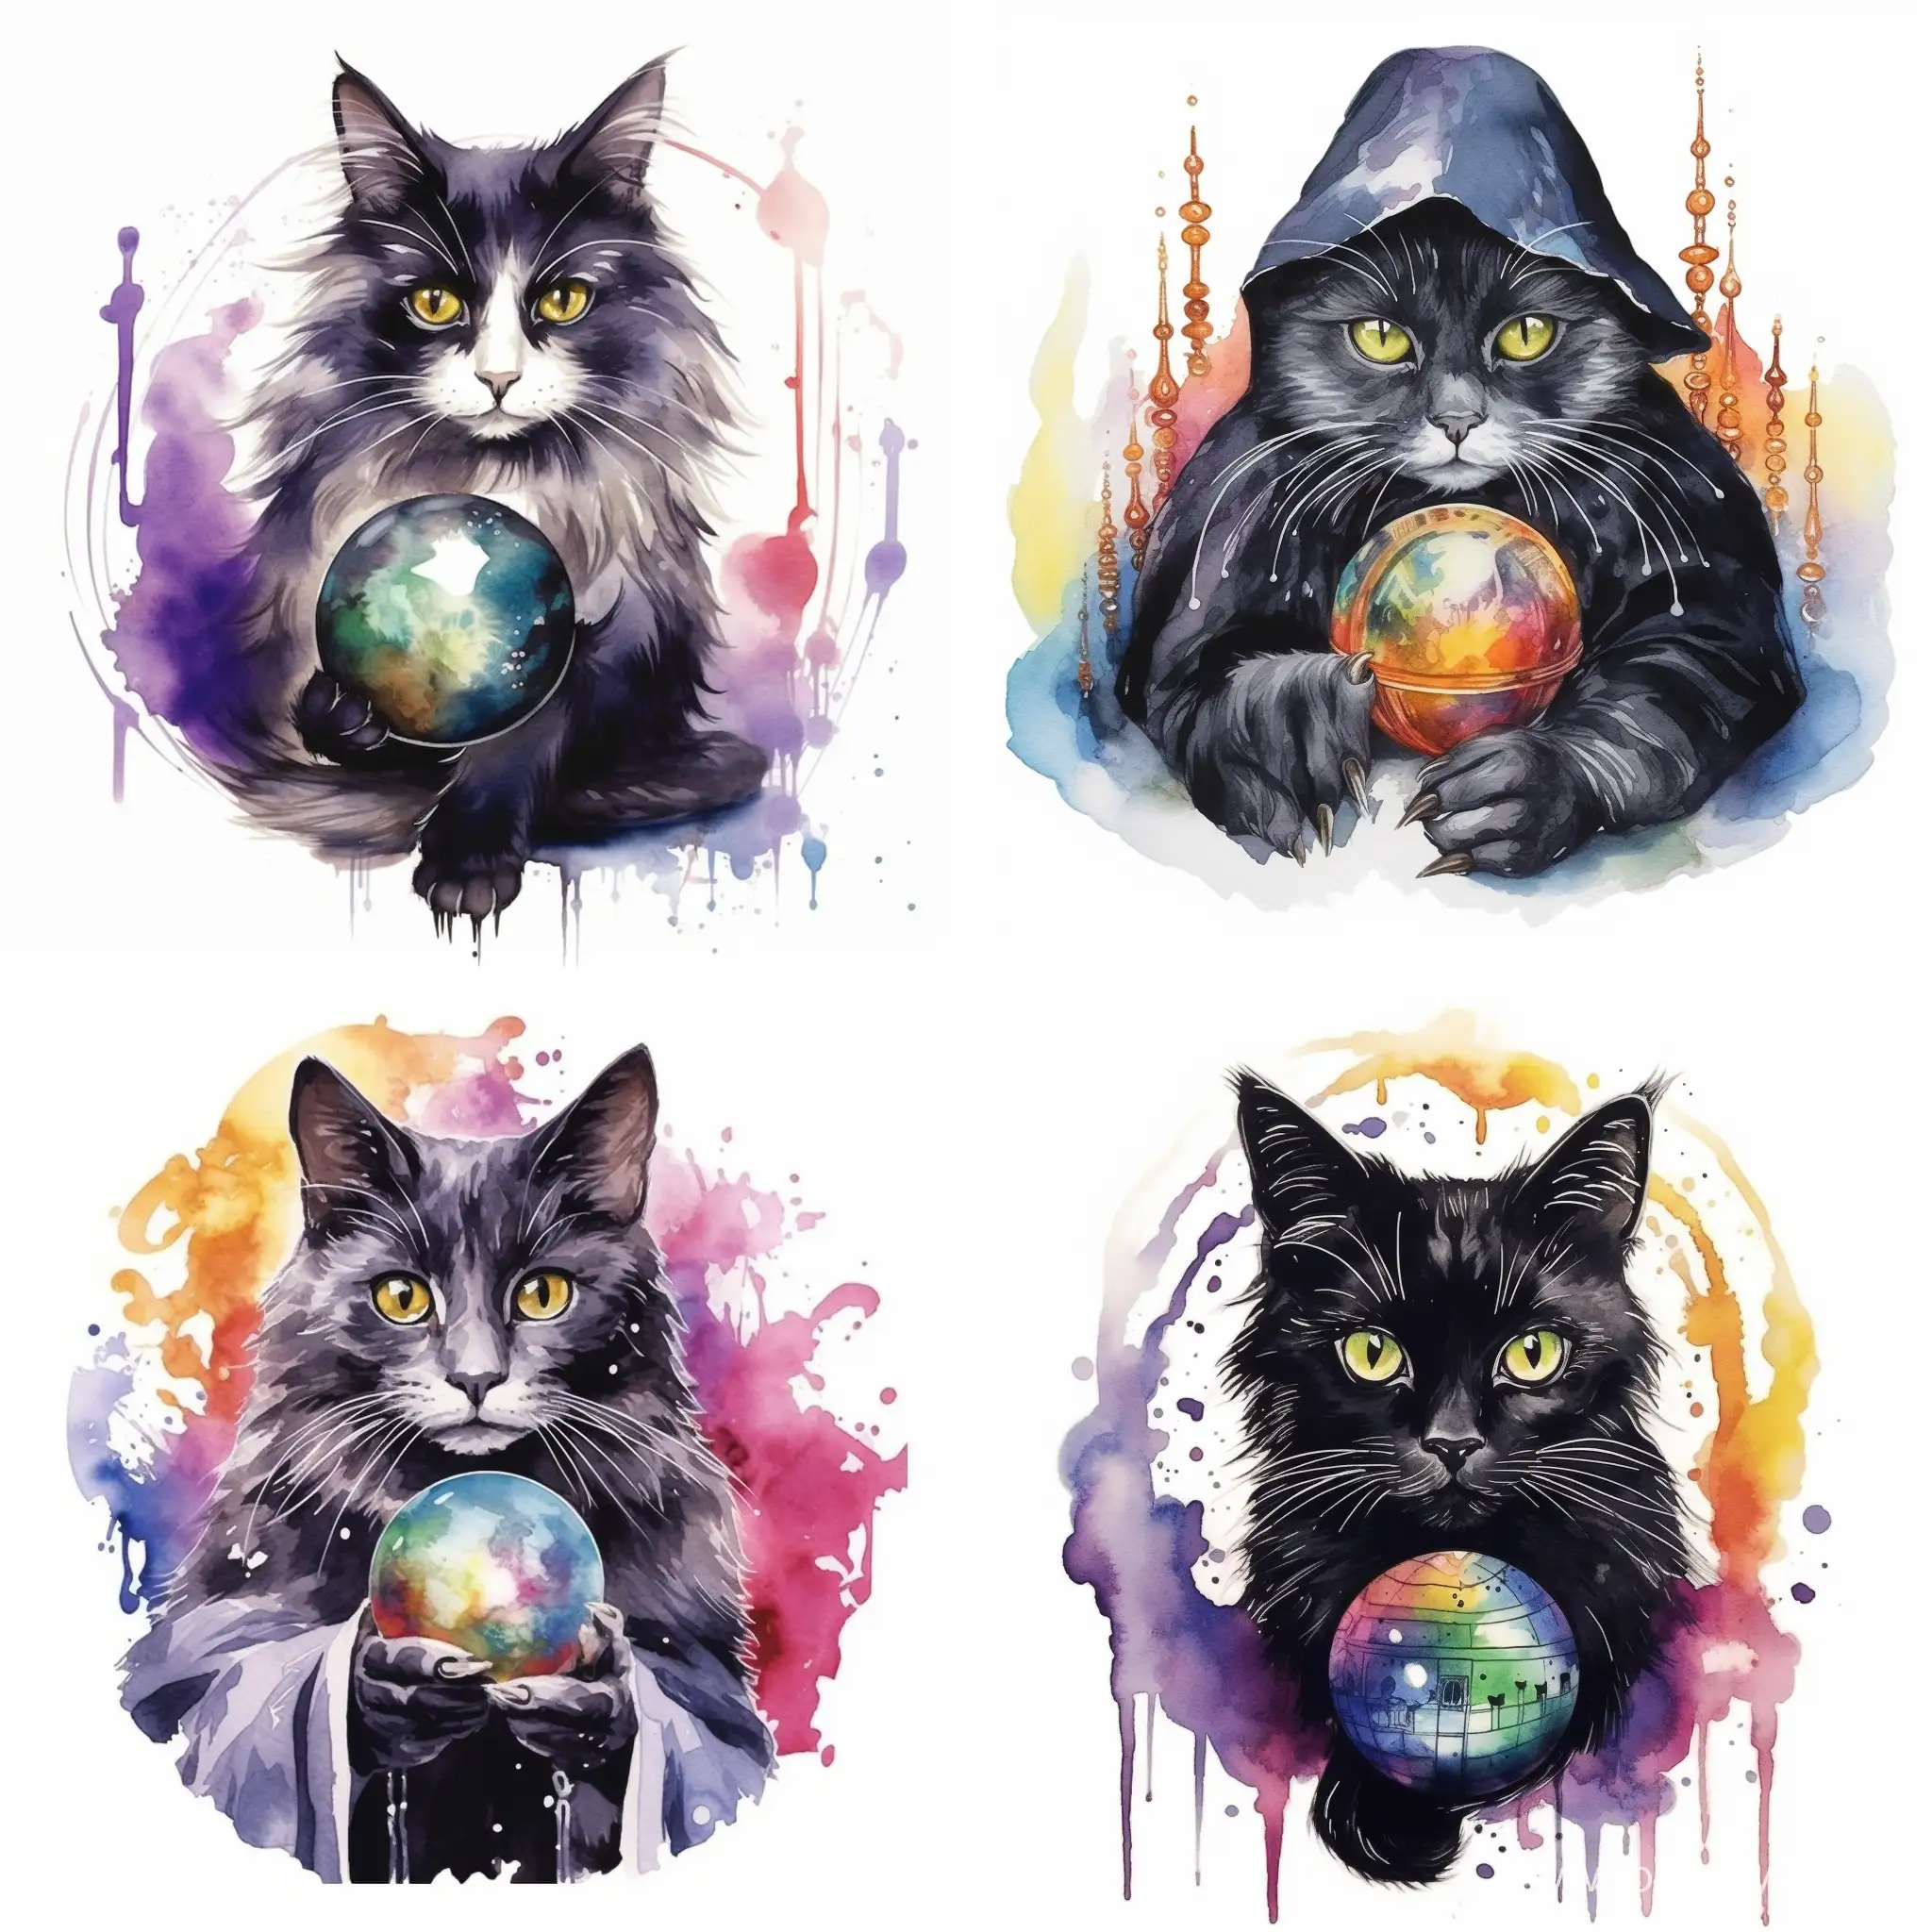 Enchanting-Witch-Cat-with-Crystal-Ball-in-Vibrant-Watercolor-Art-on-White-Background